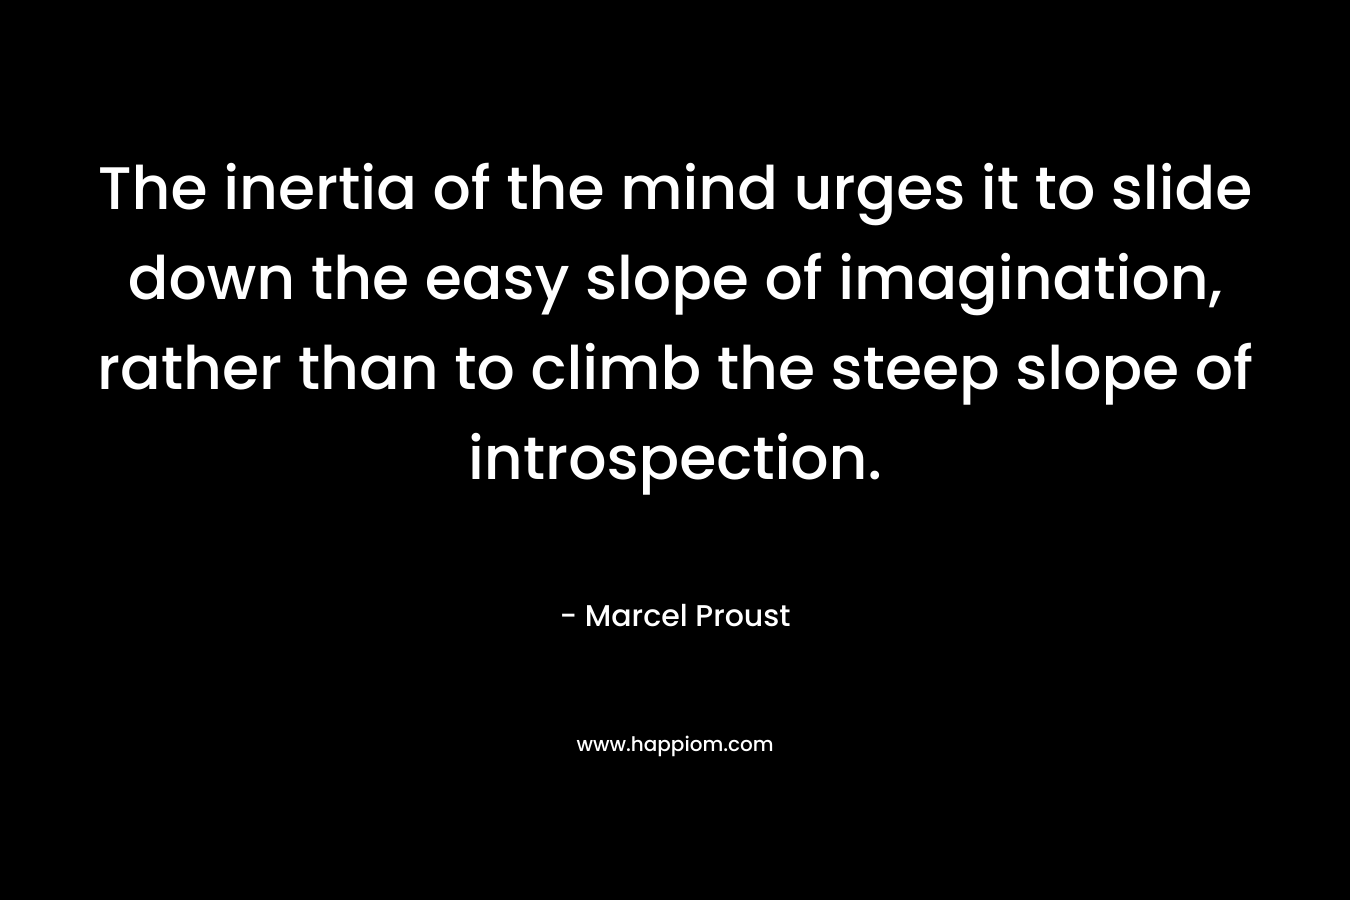 The inertia of the mind urges it to slide down the easy slope of imagination, rather than to climb the steep slope of introspection. – Marcel Proust